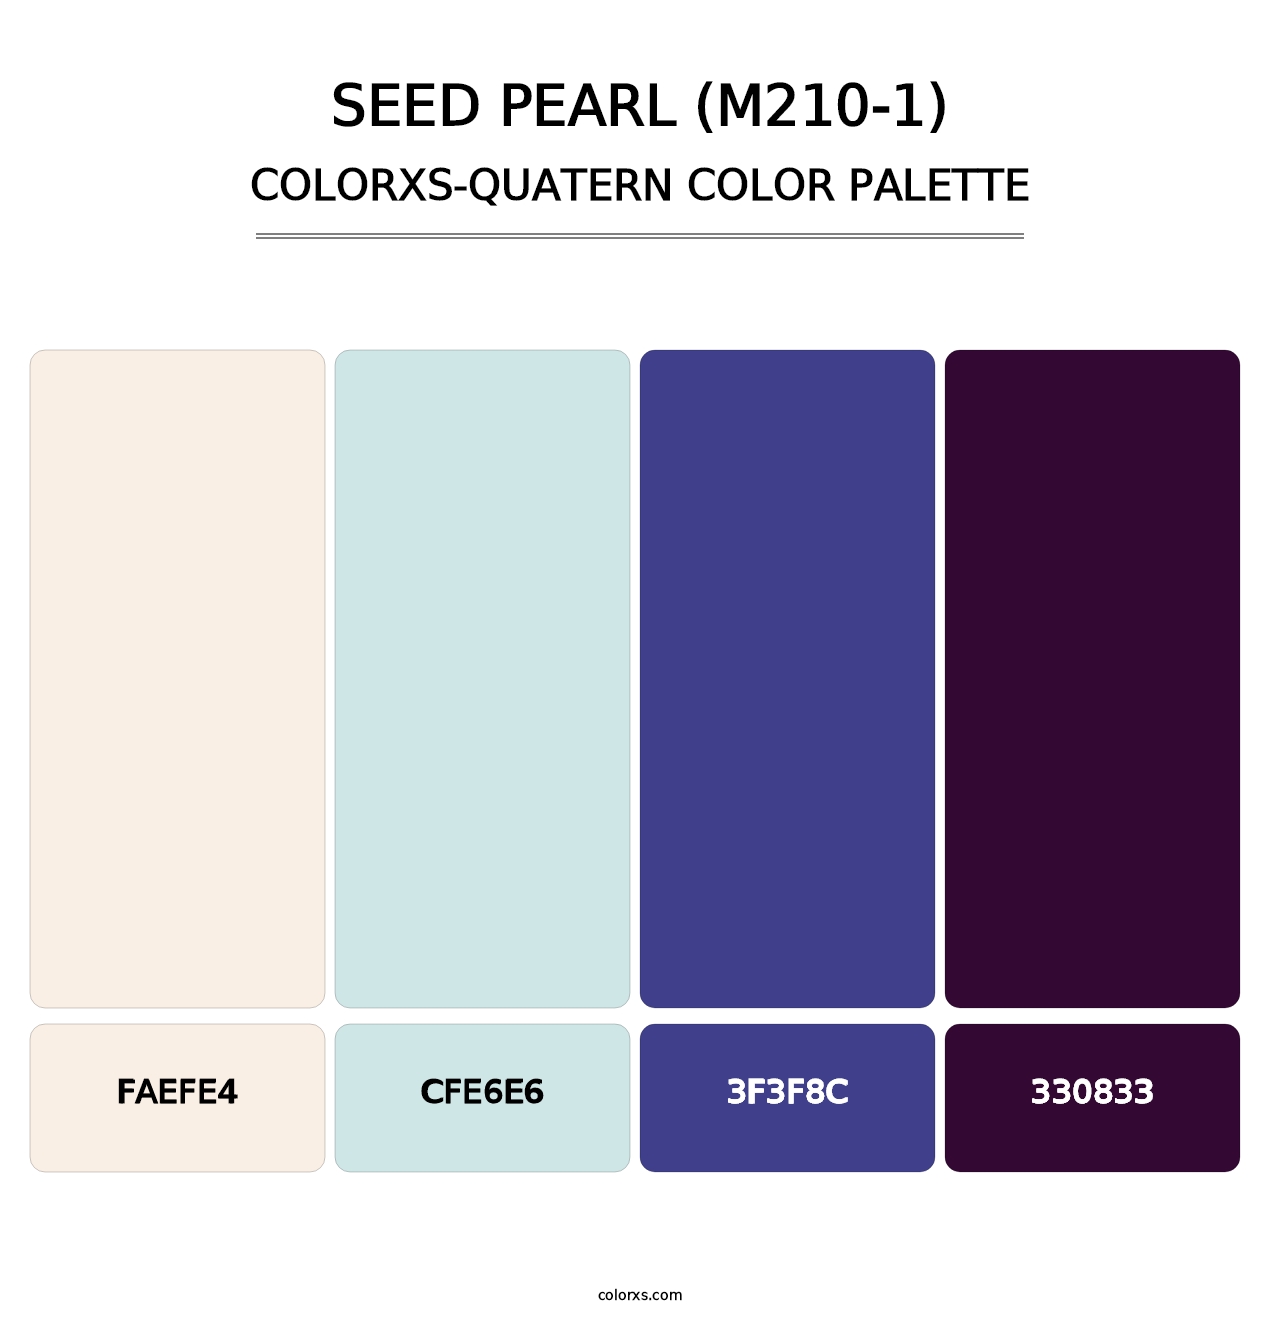 Seed Pearl (M210-1) - Colorxs Quatern Palette